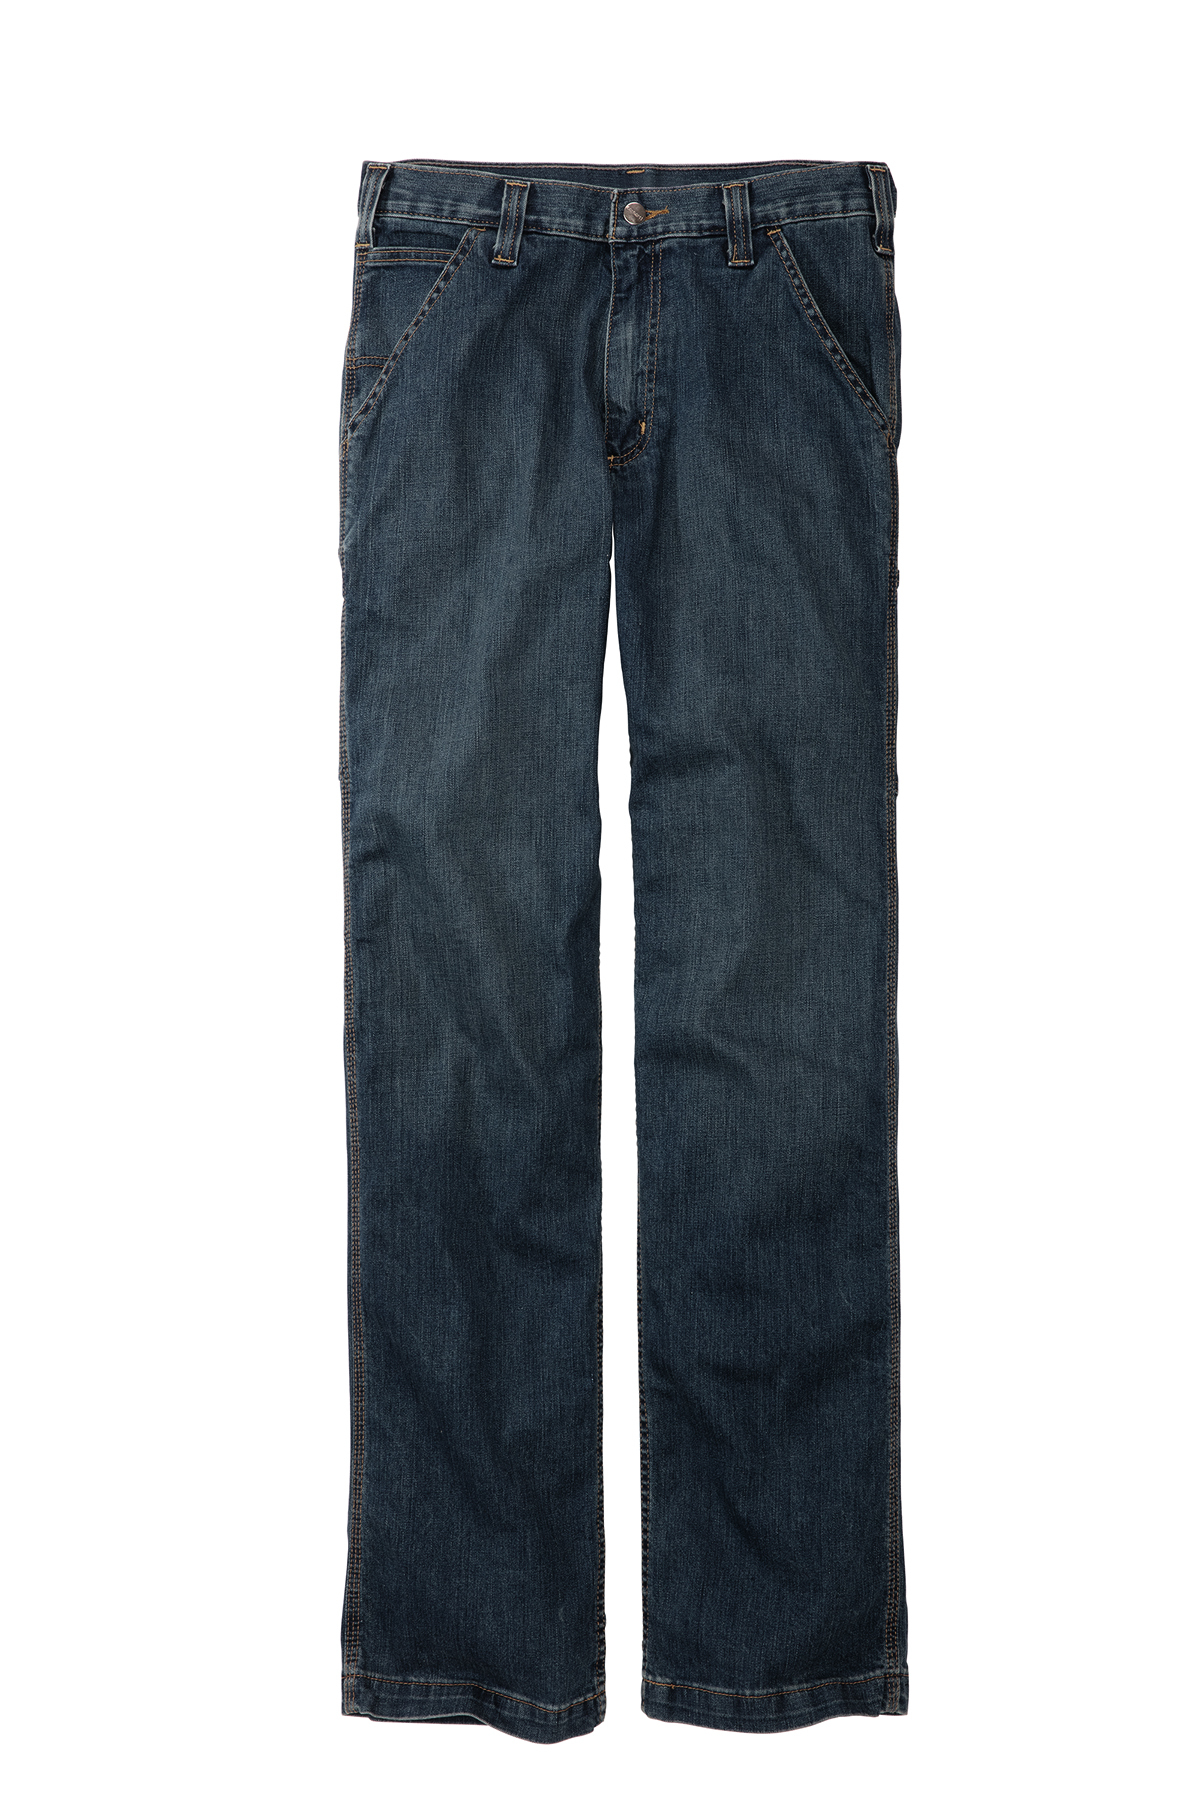 Carhartt Rugged Flex Utility Jean | Product | Company Casuals